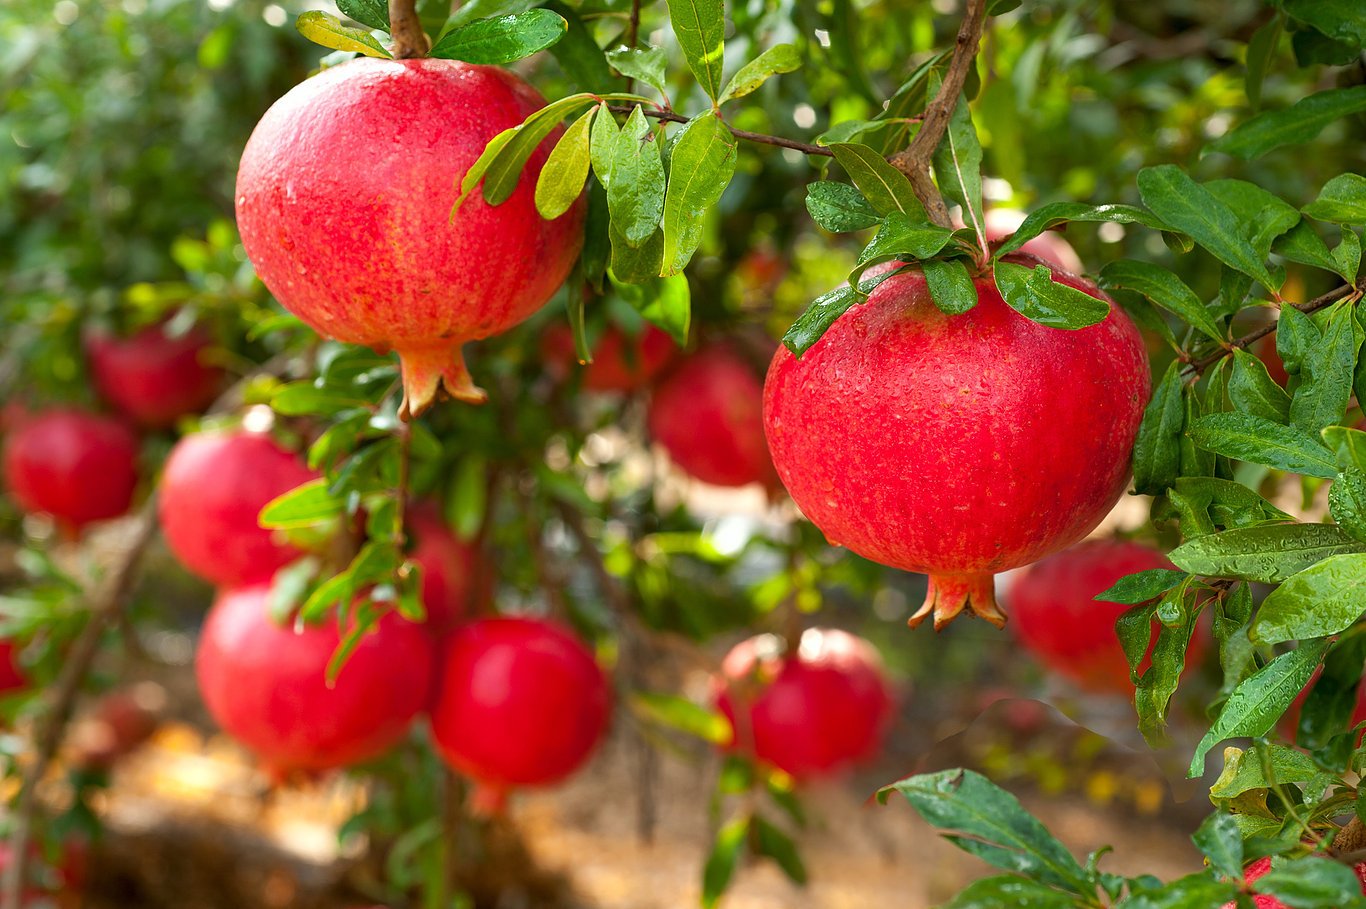 Pomegranates do not contain cholesterol or saturated fats.